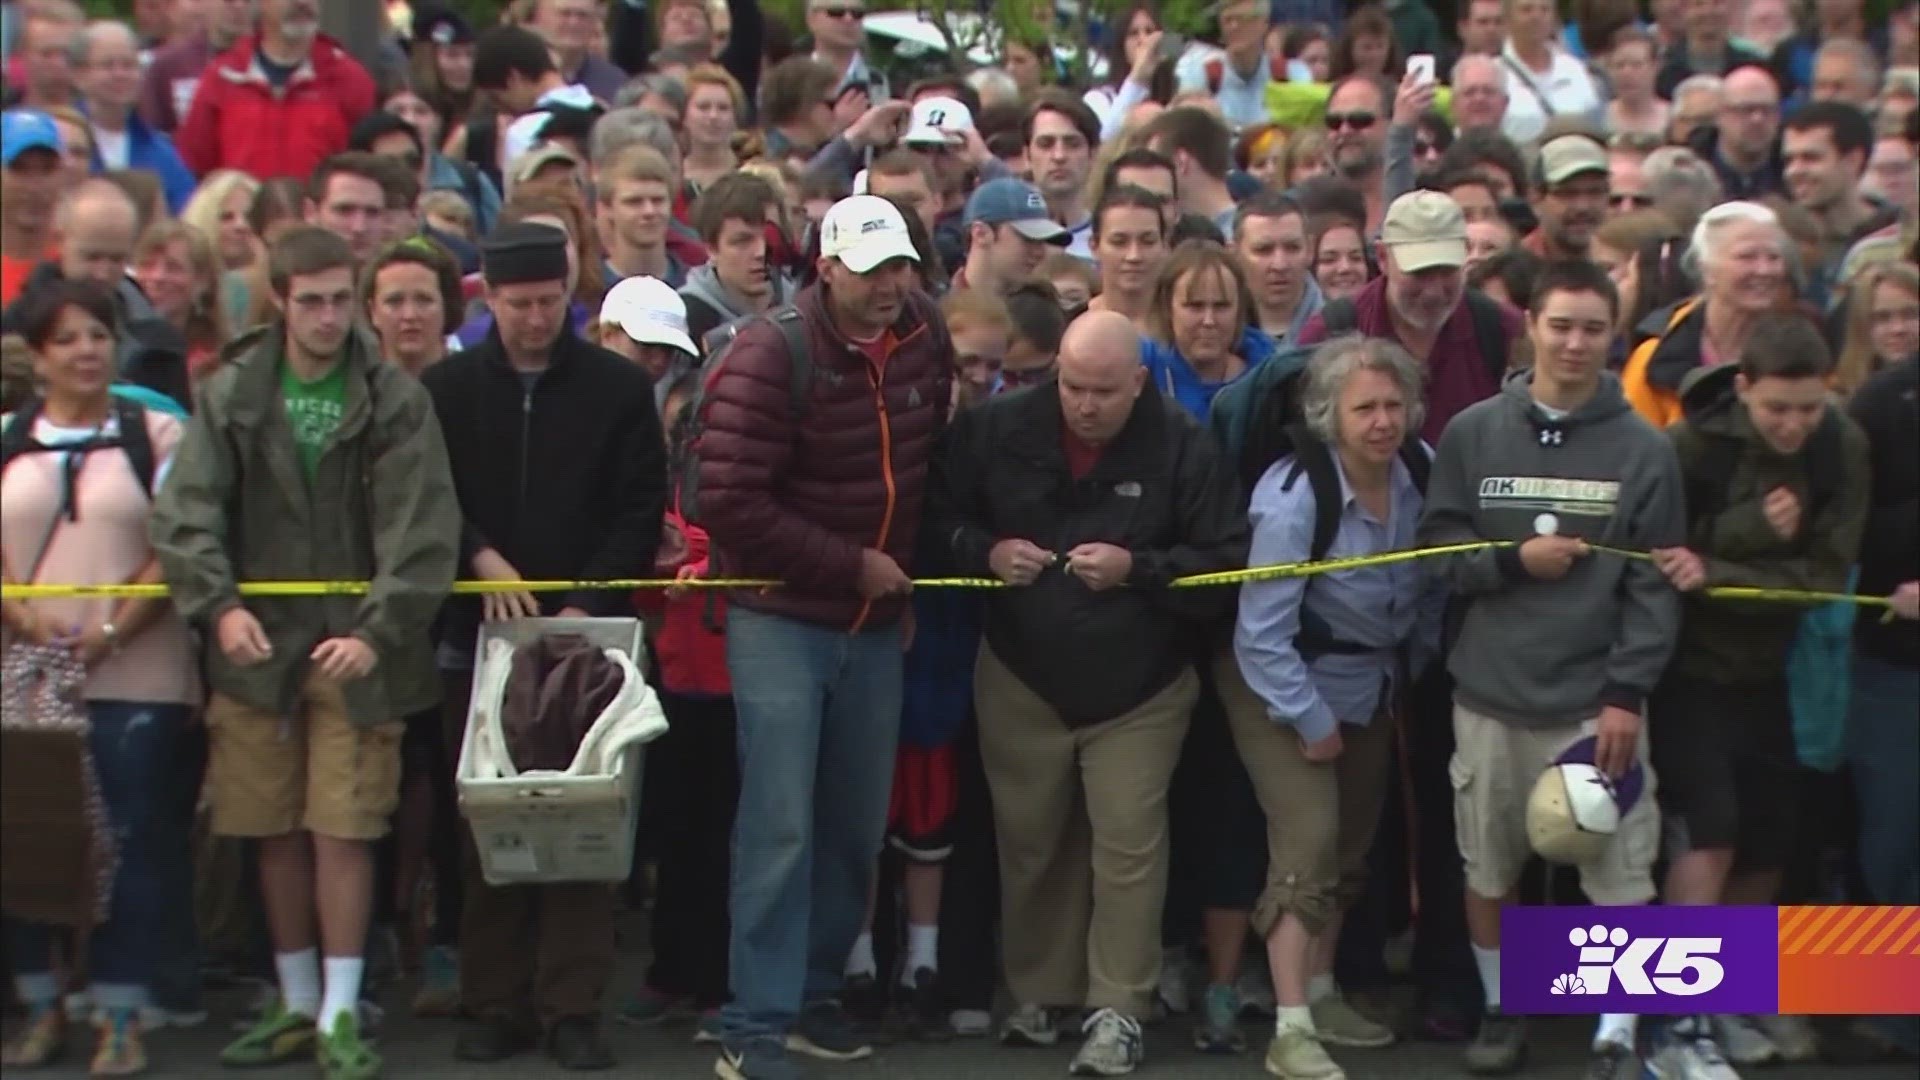 It's 7:30 a.m. on Bainbridge Island, and this crowd is gathered ... for a garage sale. #k5evening